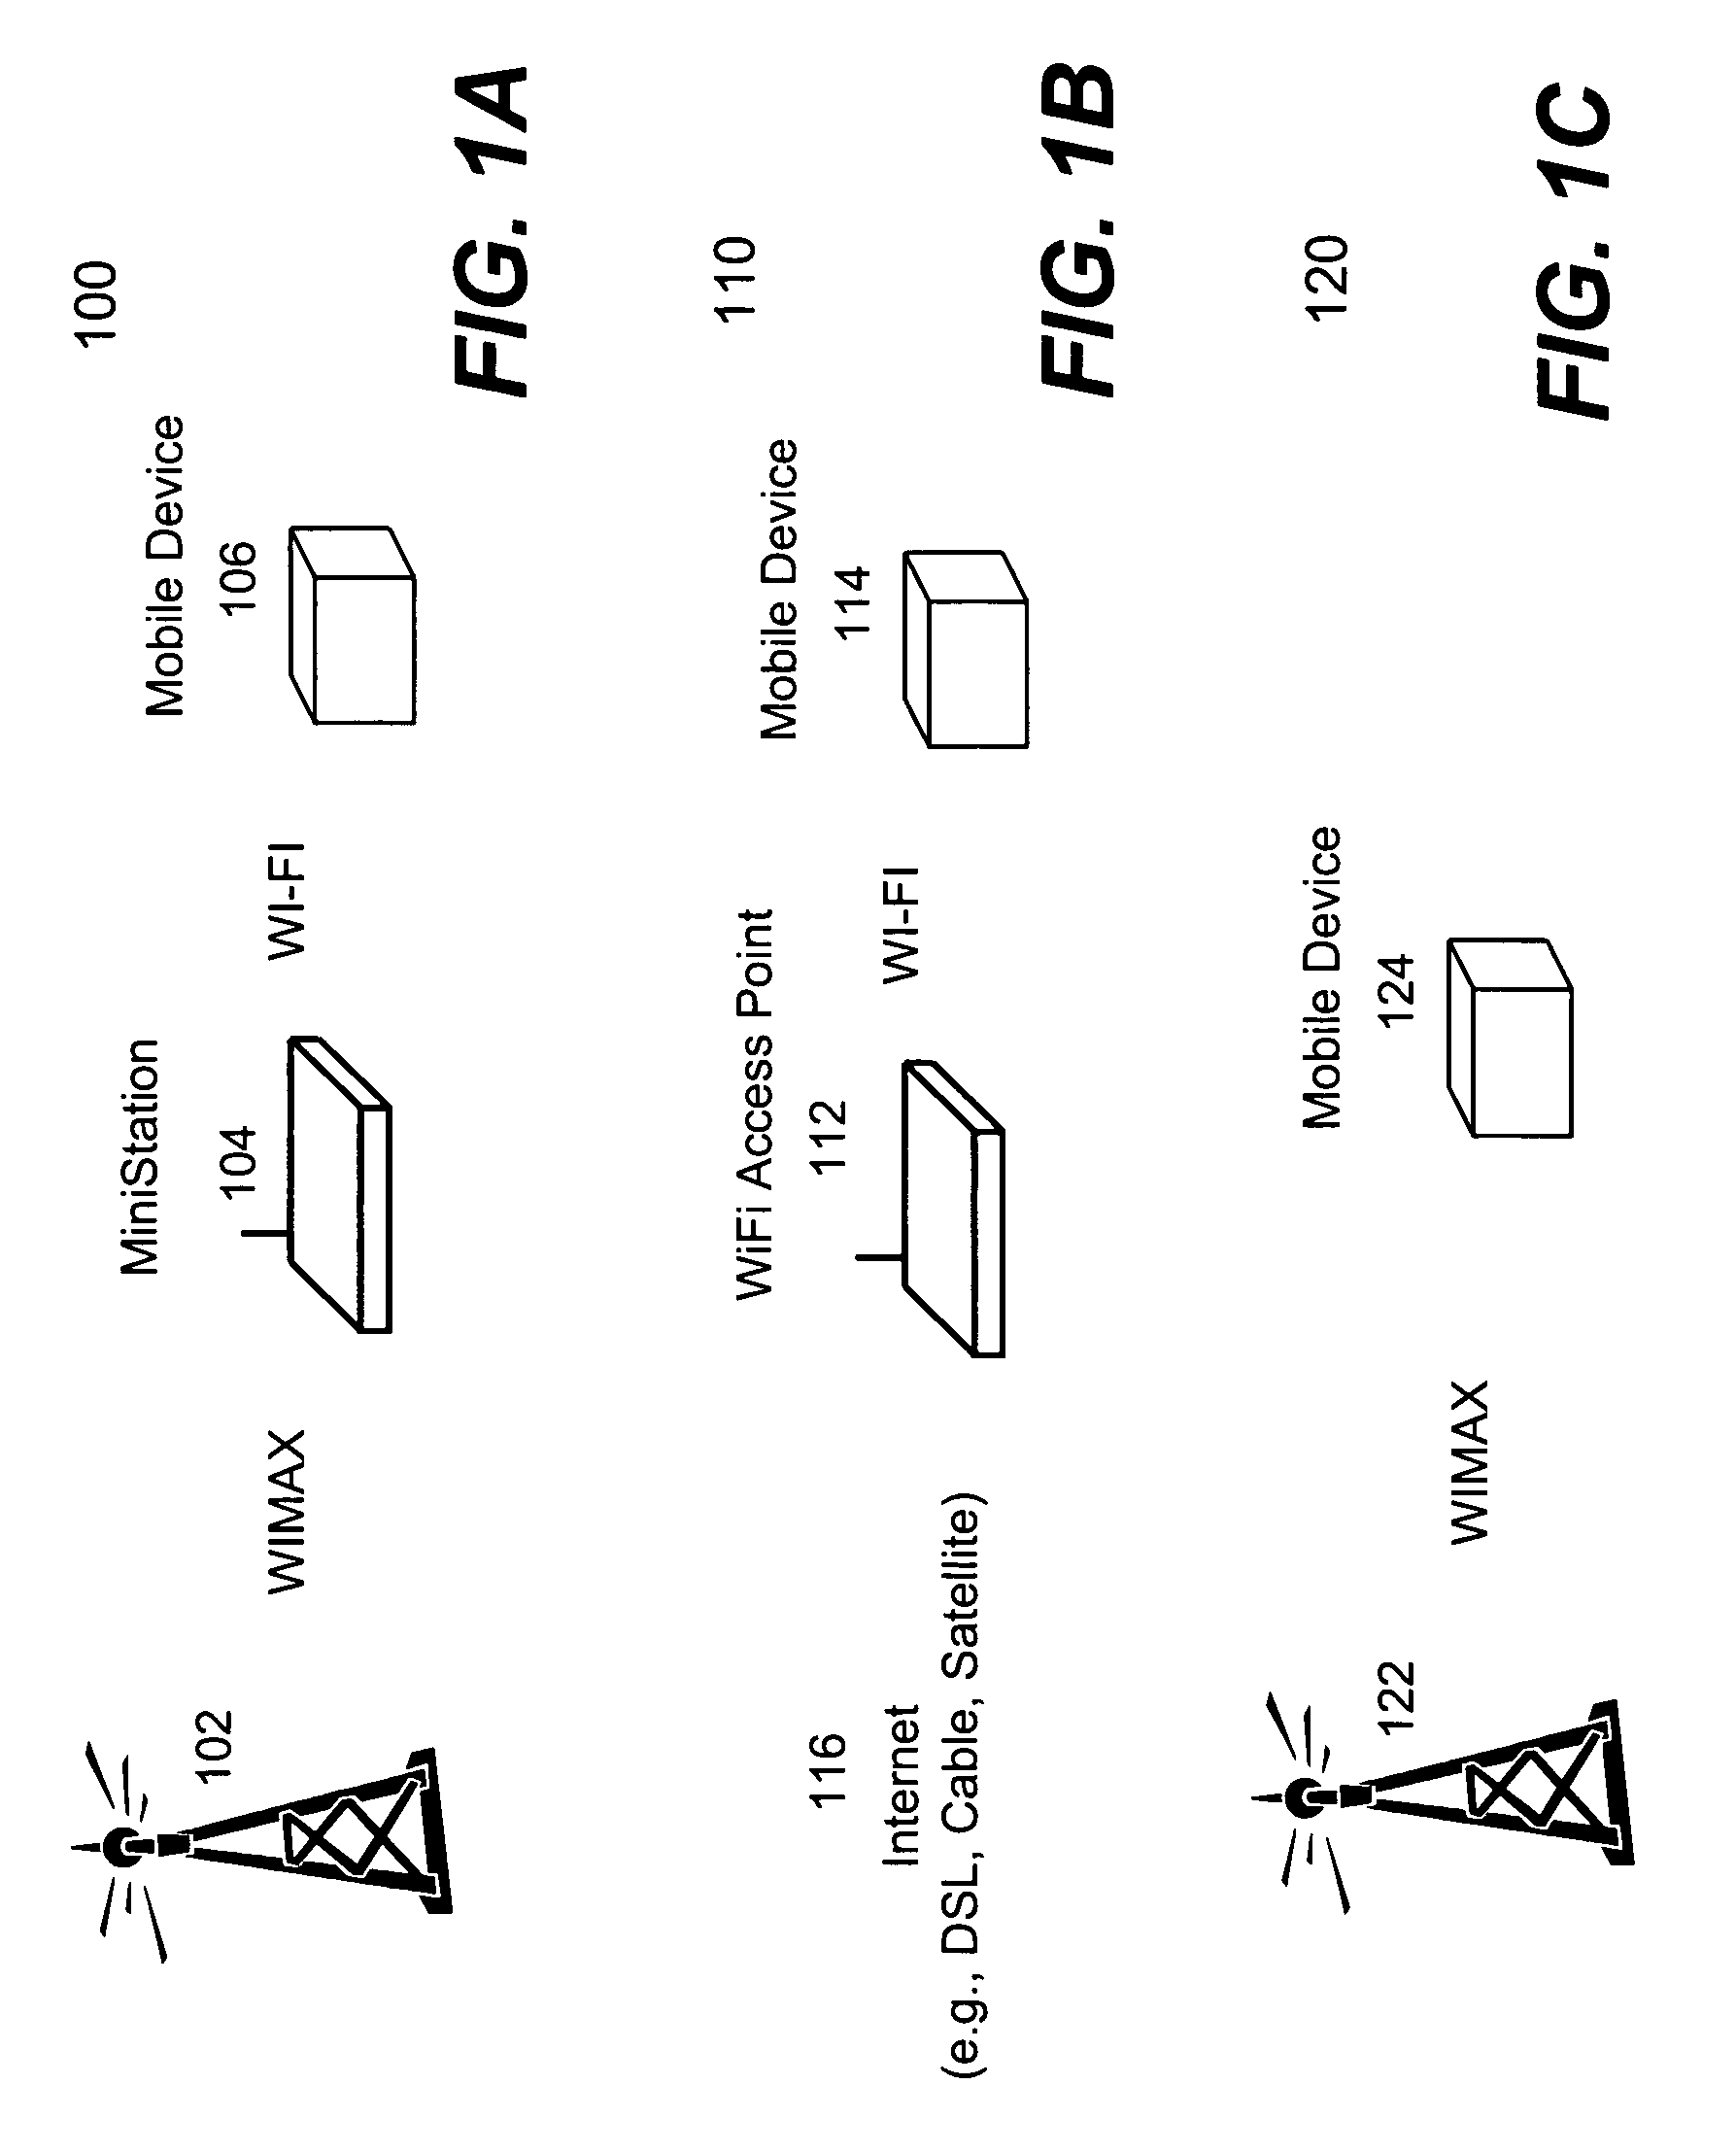 Transceiver architecture for supporting multi-band RF